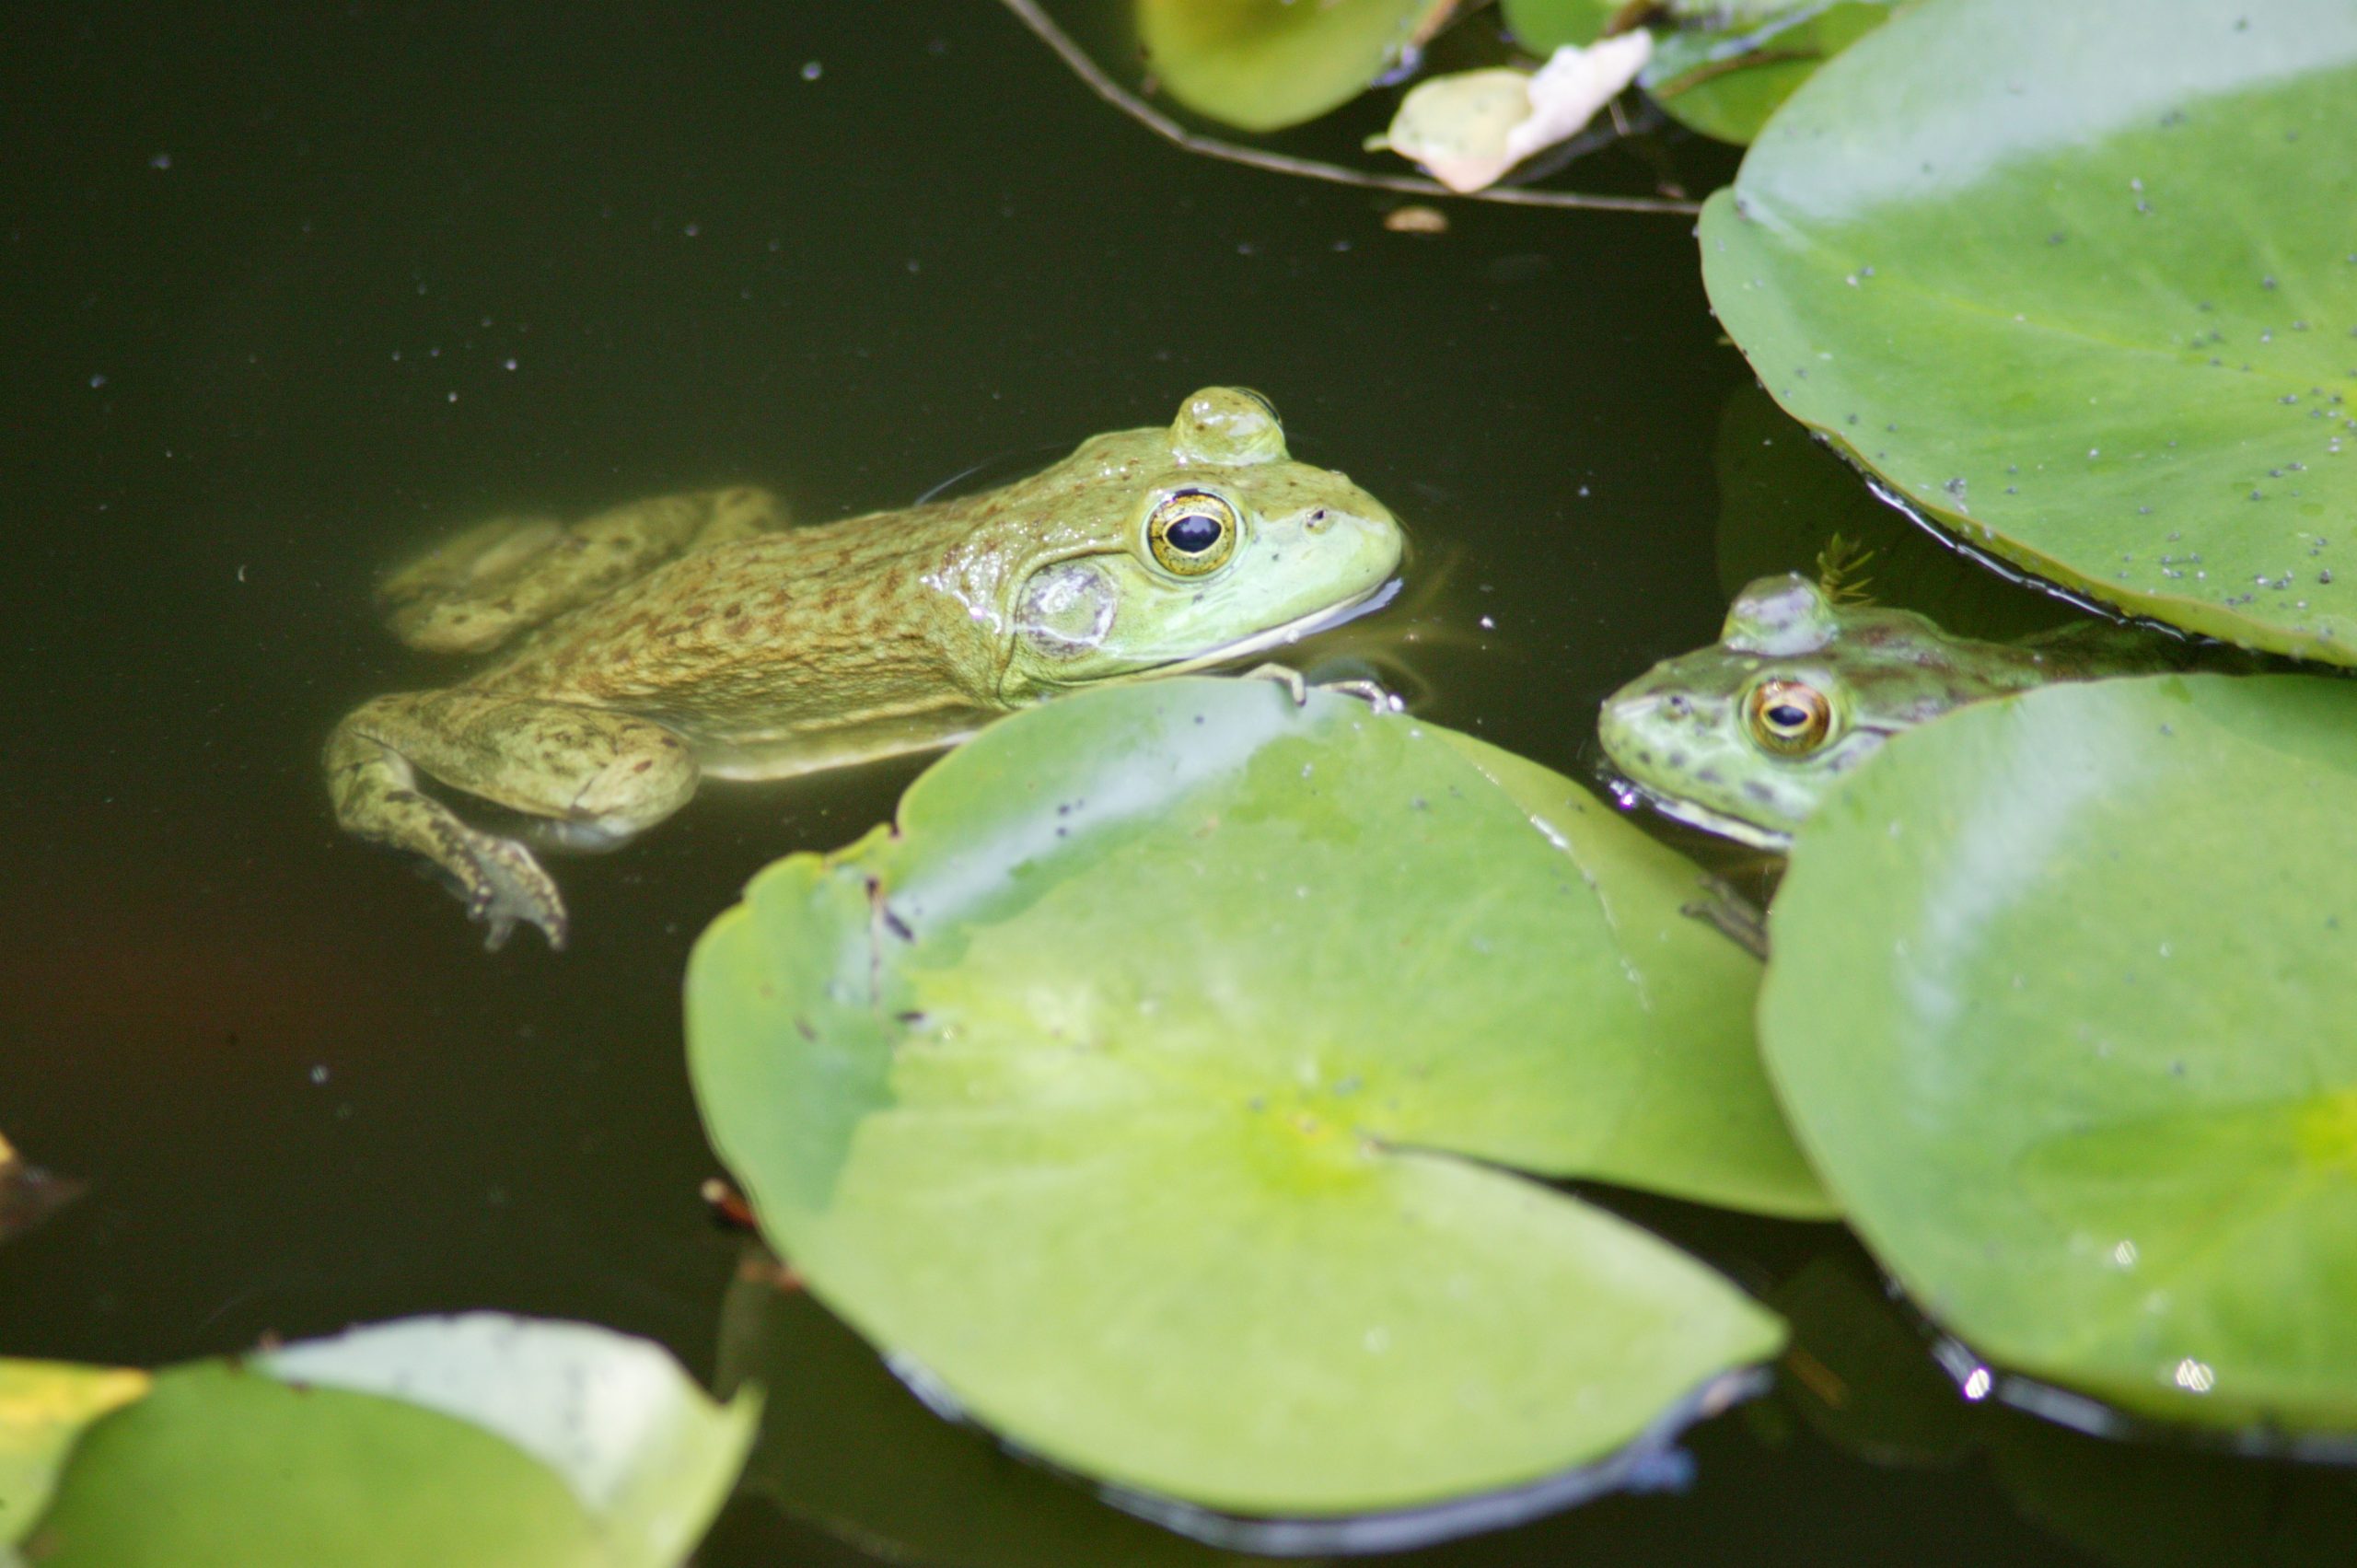 Frog Pond (user submitted)